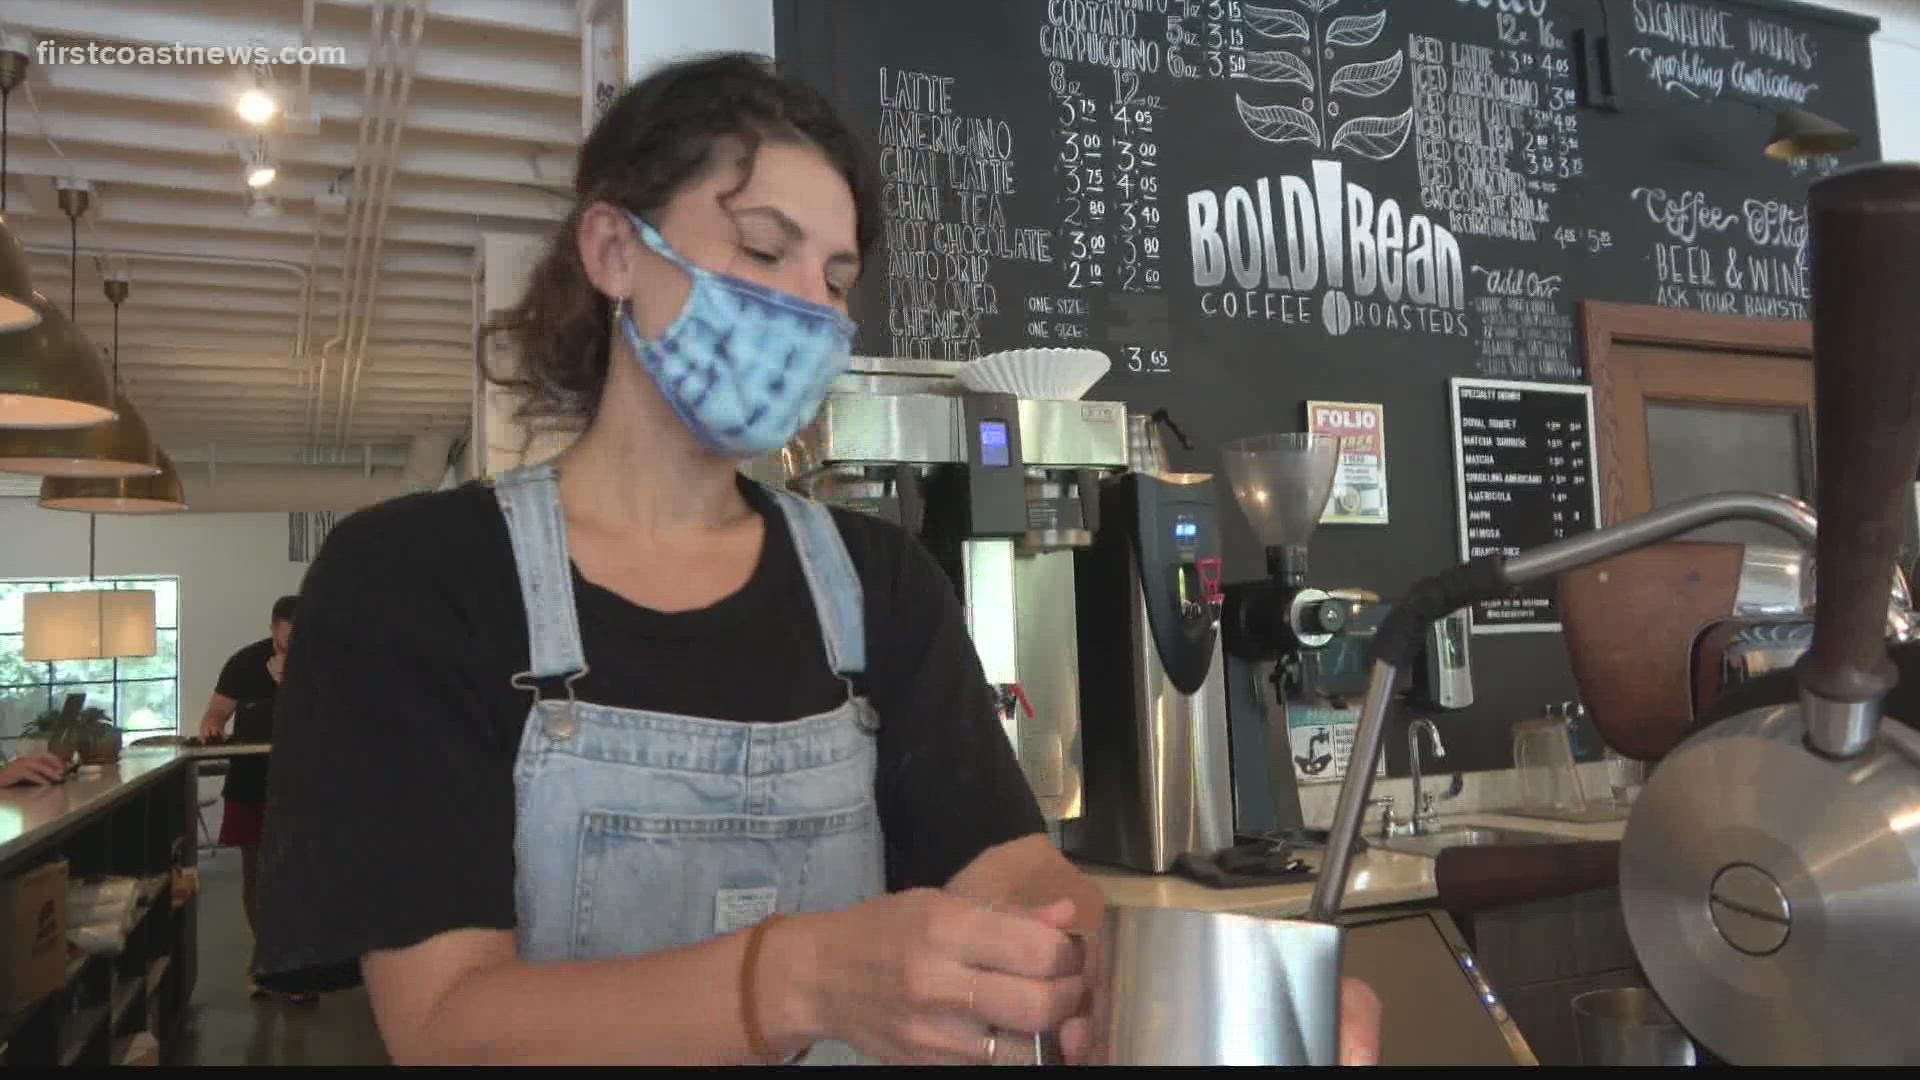 A place for friends and good coffee is closing down in Jacksonville after the pandemic steals its foot traffic.